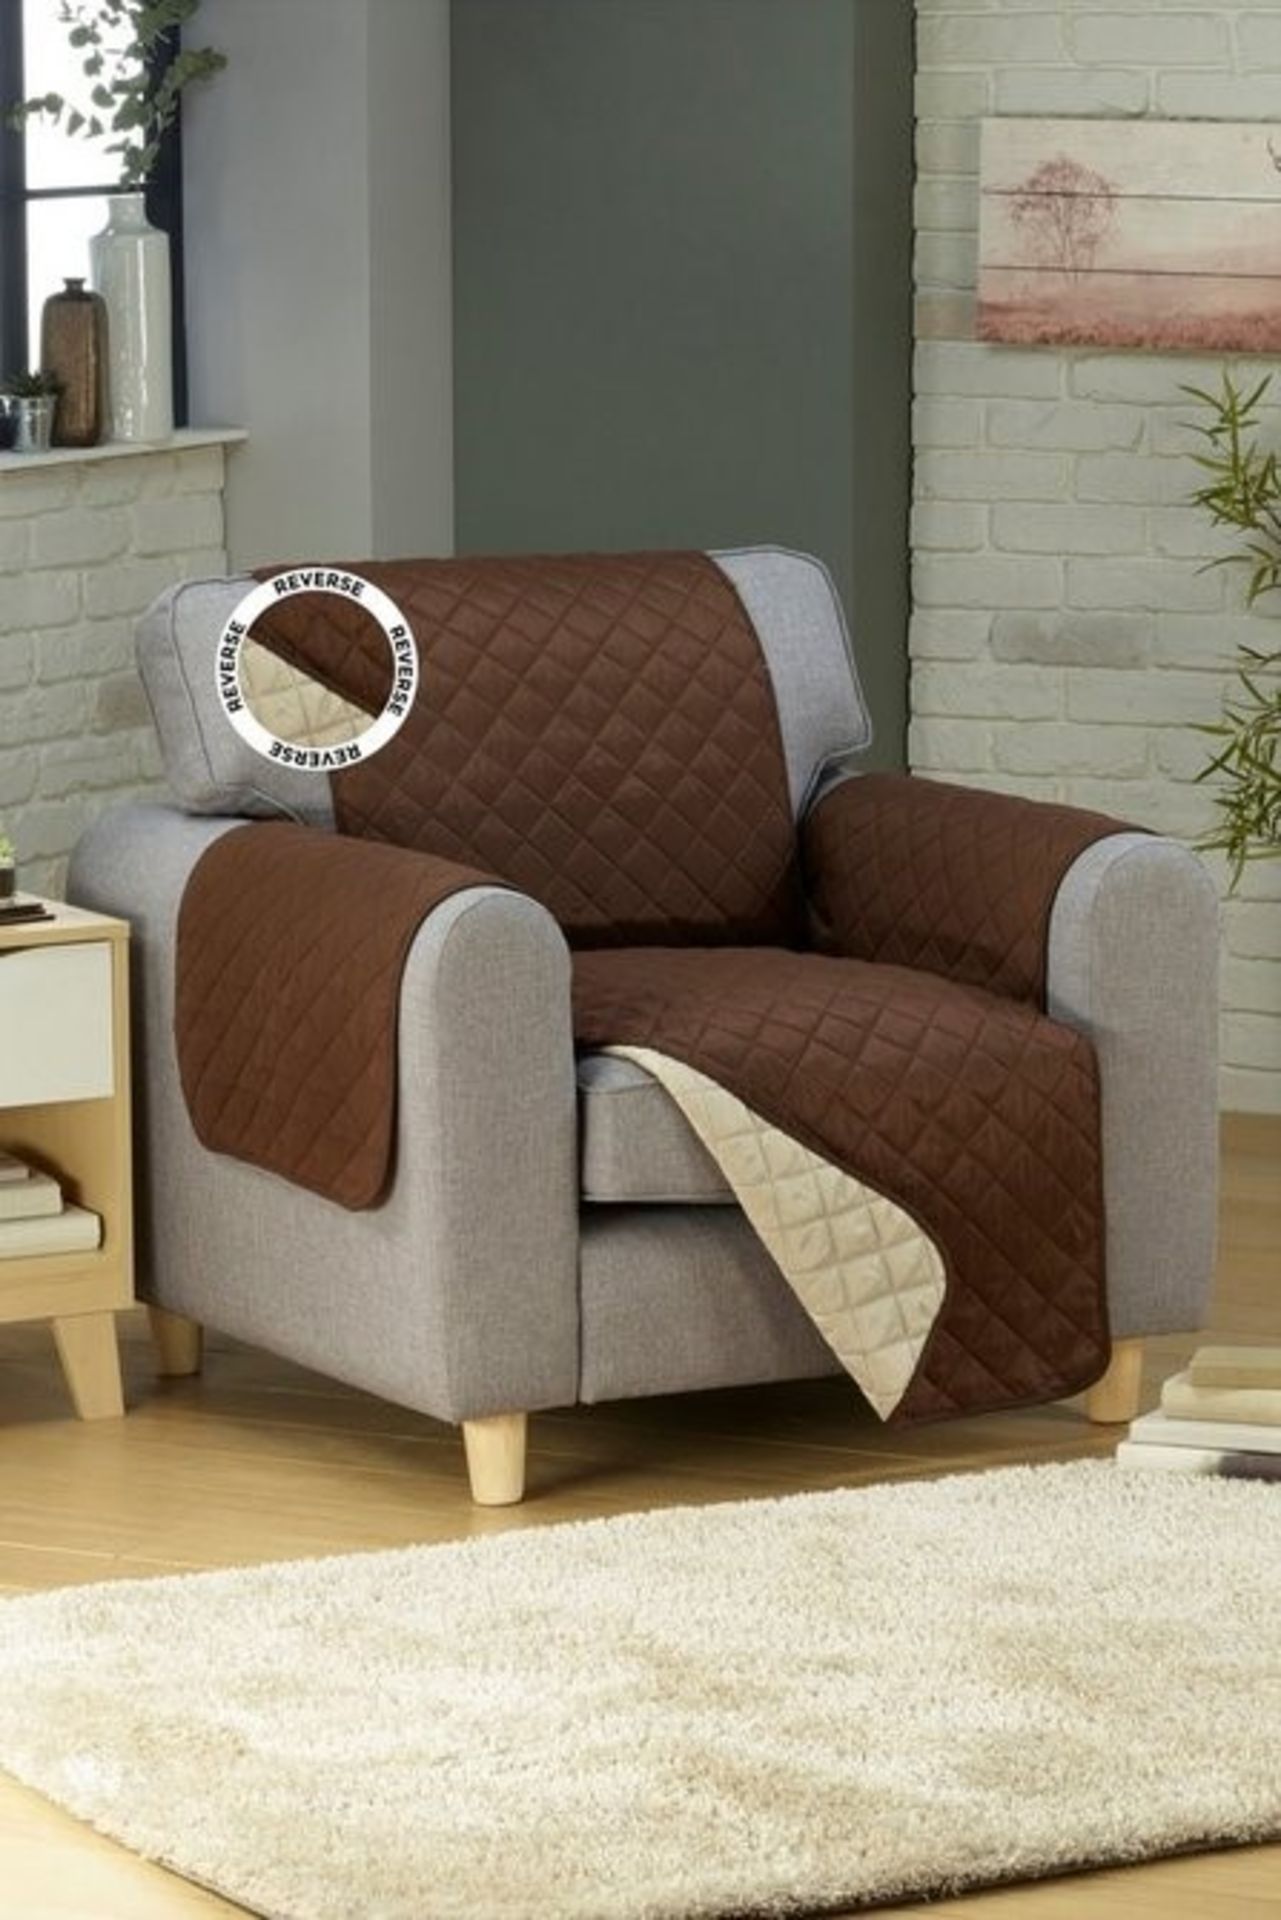 1 AS NEW BAGGED FURNITURE PROTECTOR IN BROWN AND BEIGE (PUBLIC VIEWING AVAILABLE)